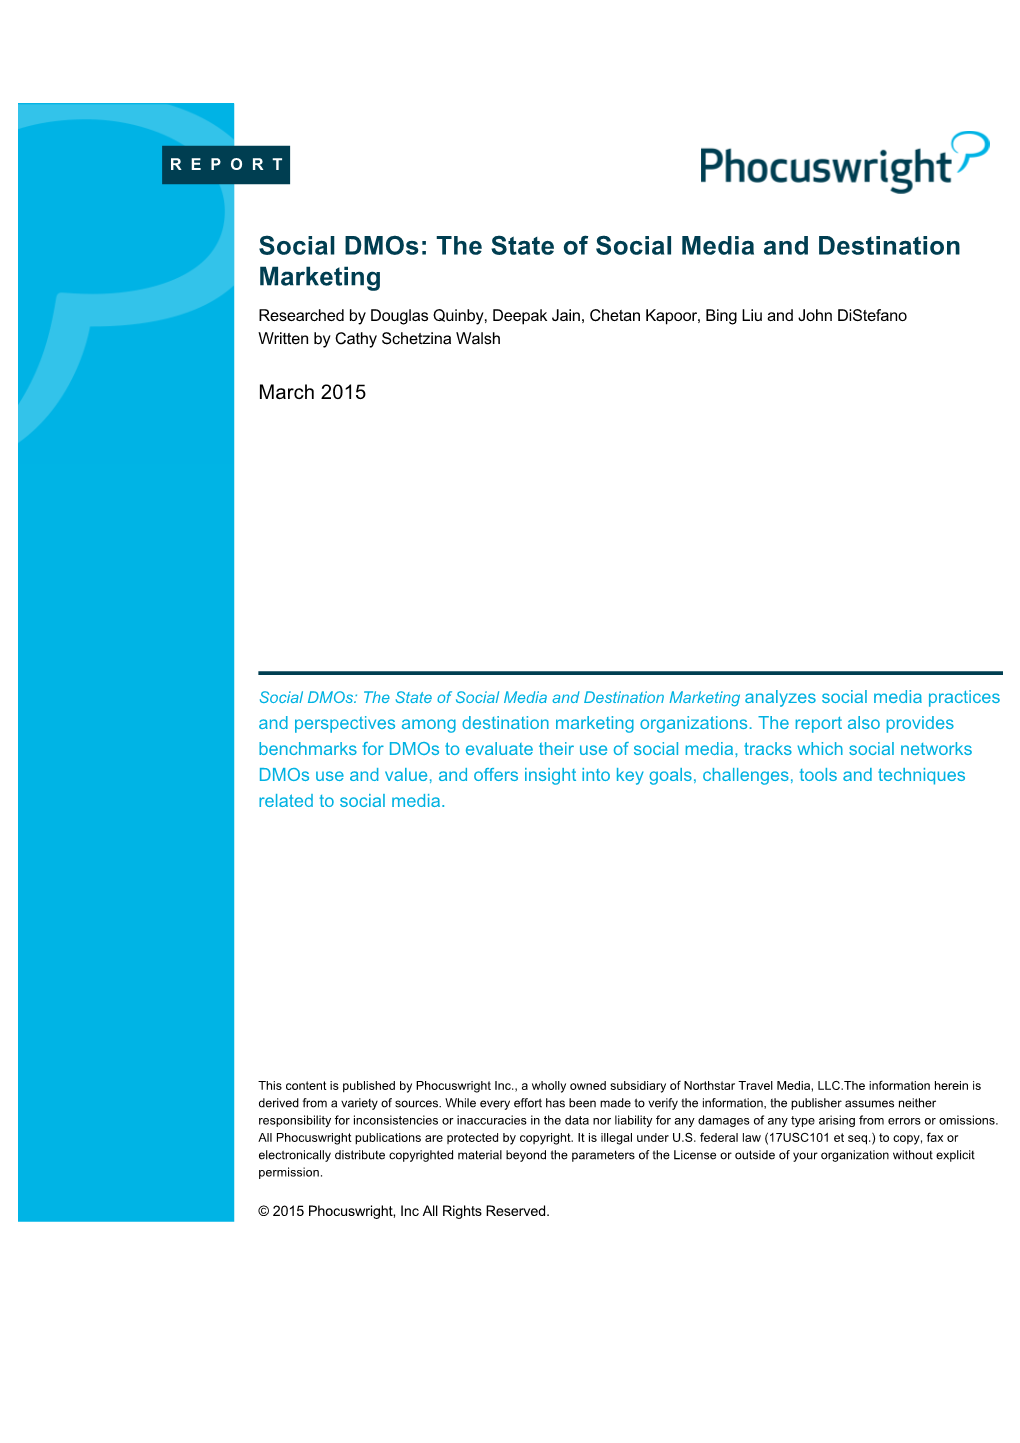 Social Dmos: the State of Social Media and Destination Marketing